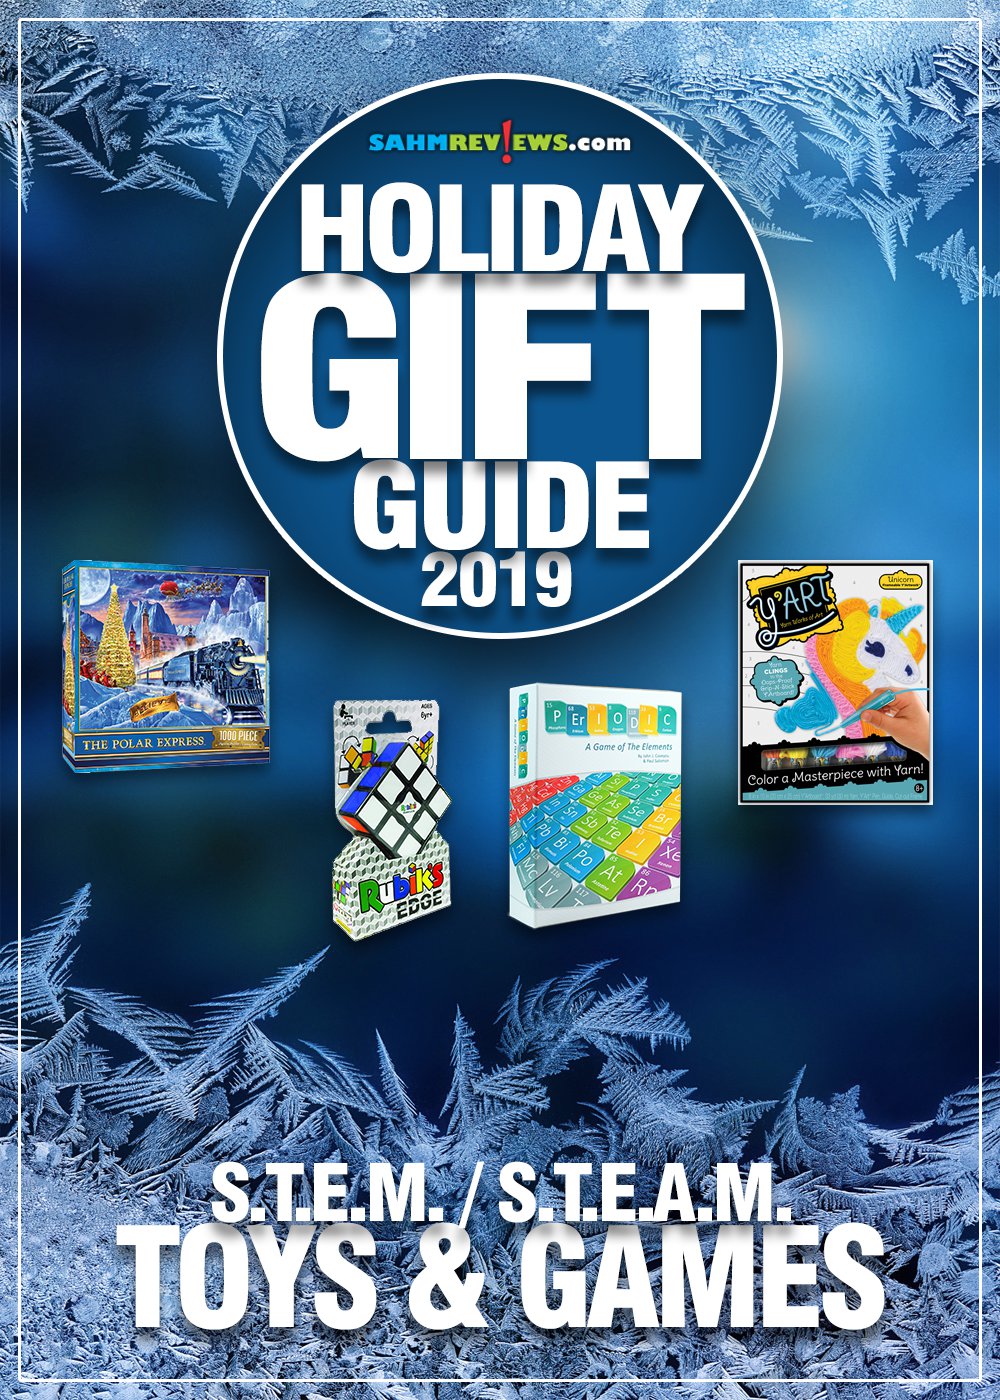 Toys and games don't have to be just about fun. They can also offer a learning experience. Like these items in our 2019 S.T.E.M. / S.T.E.A.M. Holiday Gift Guide! - SahmReviews.com